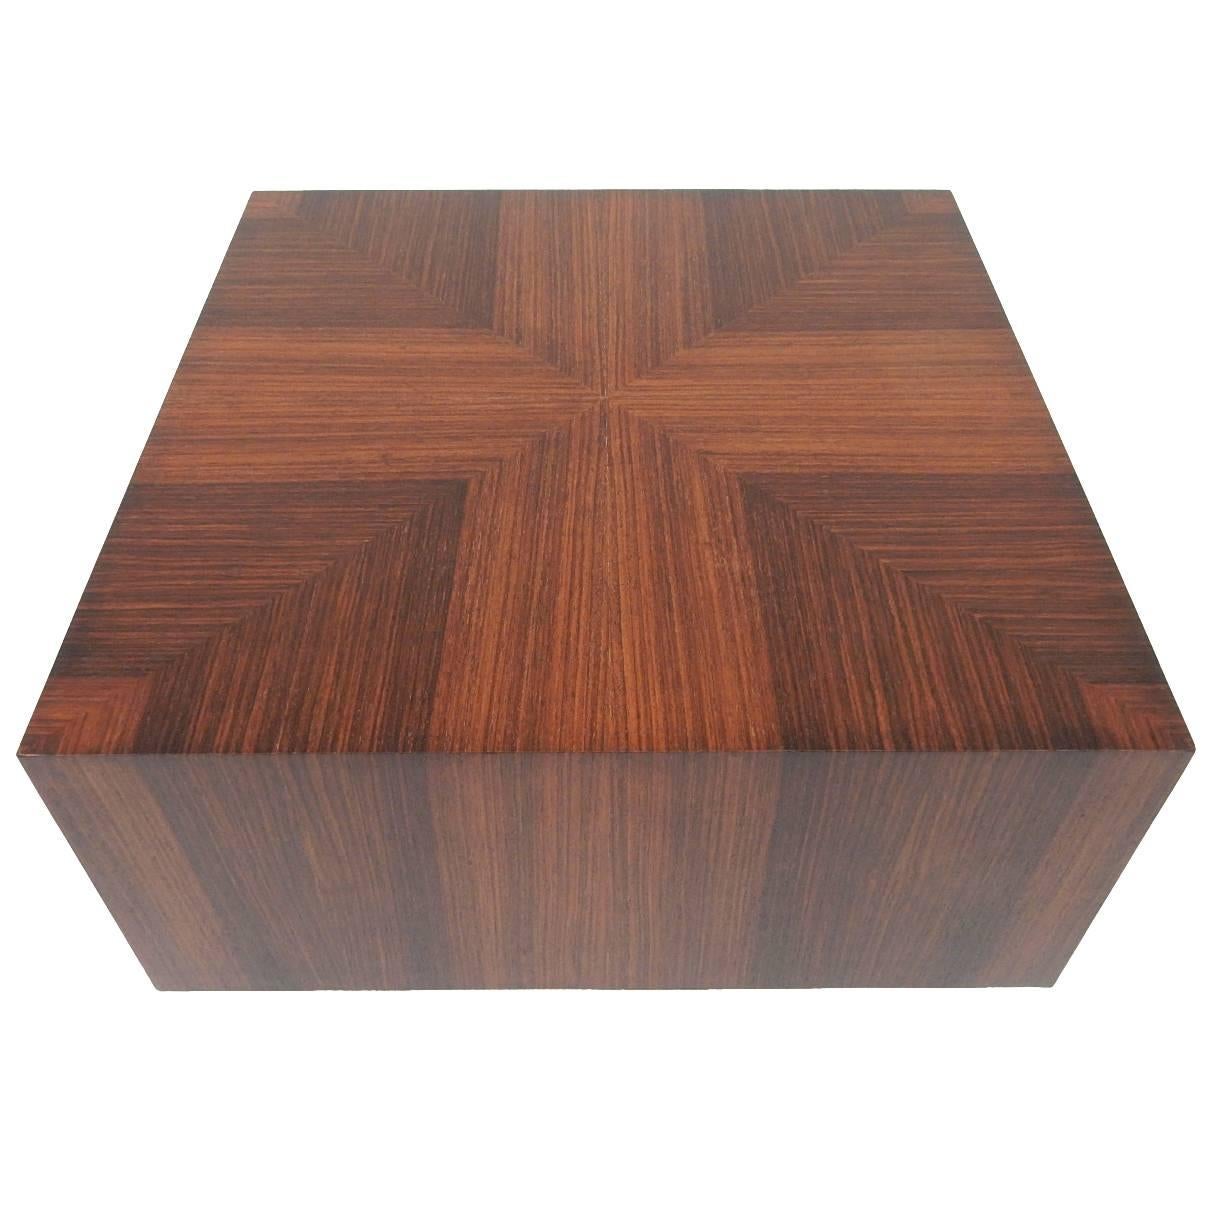 Milo Baughman Style Rosewood and Aluminum Cube Coffee Table